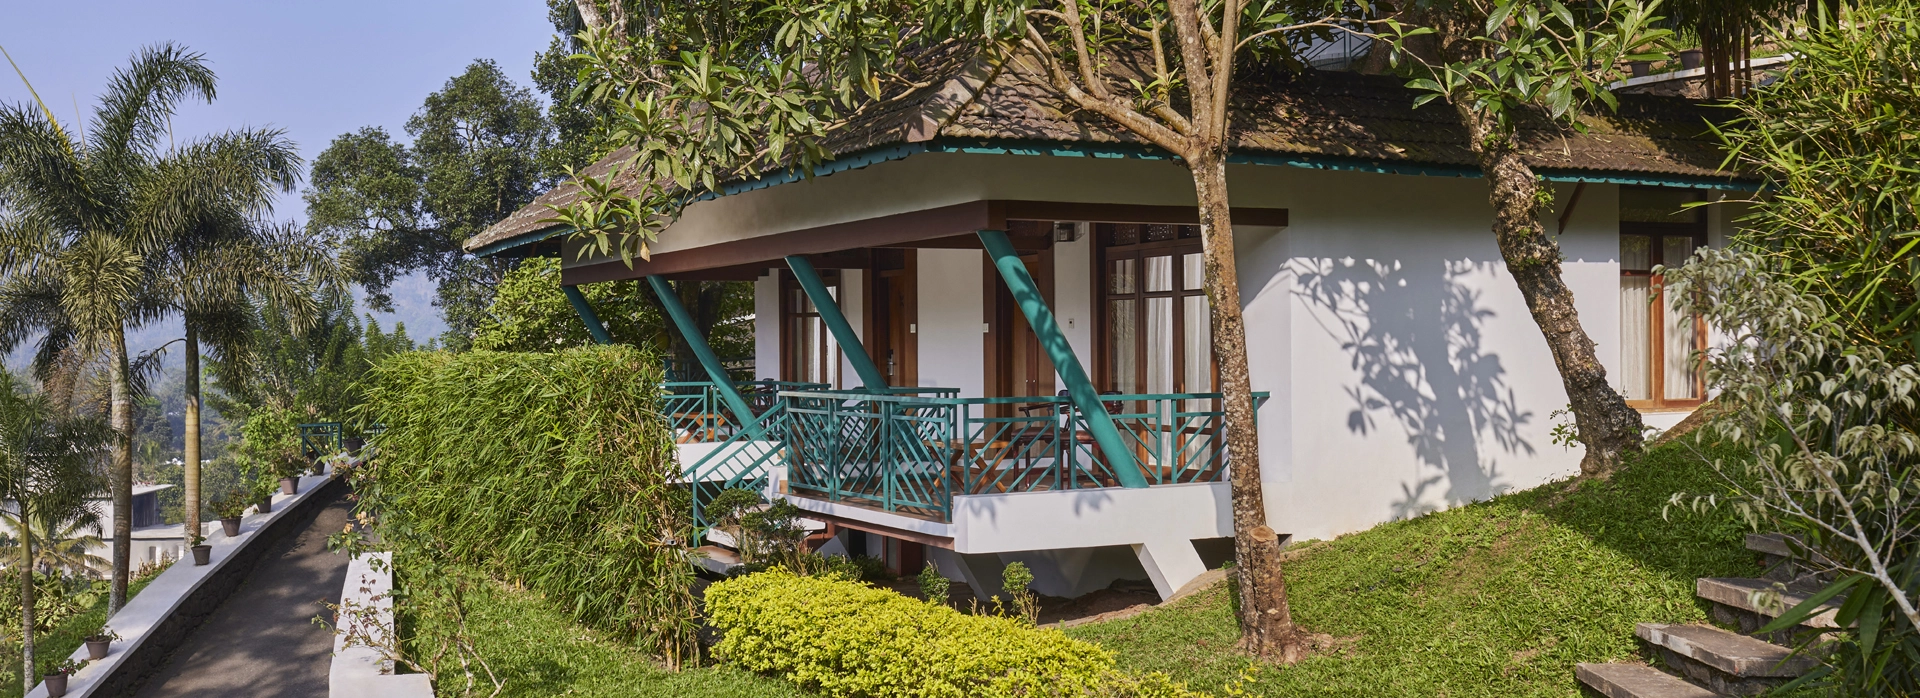 deluxe cottages in thekkady